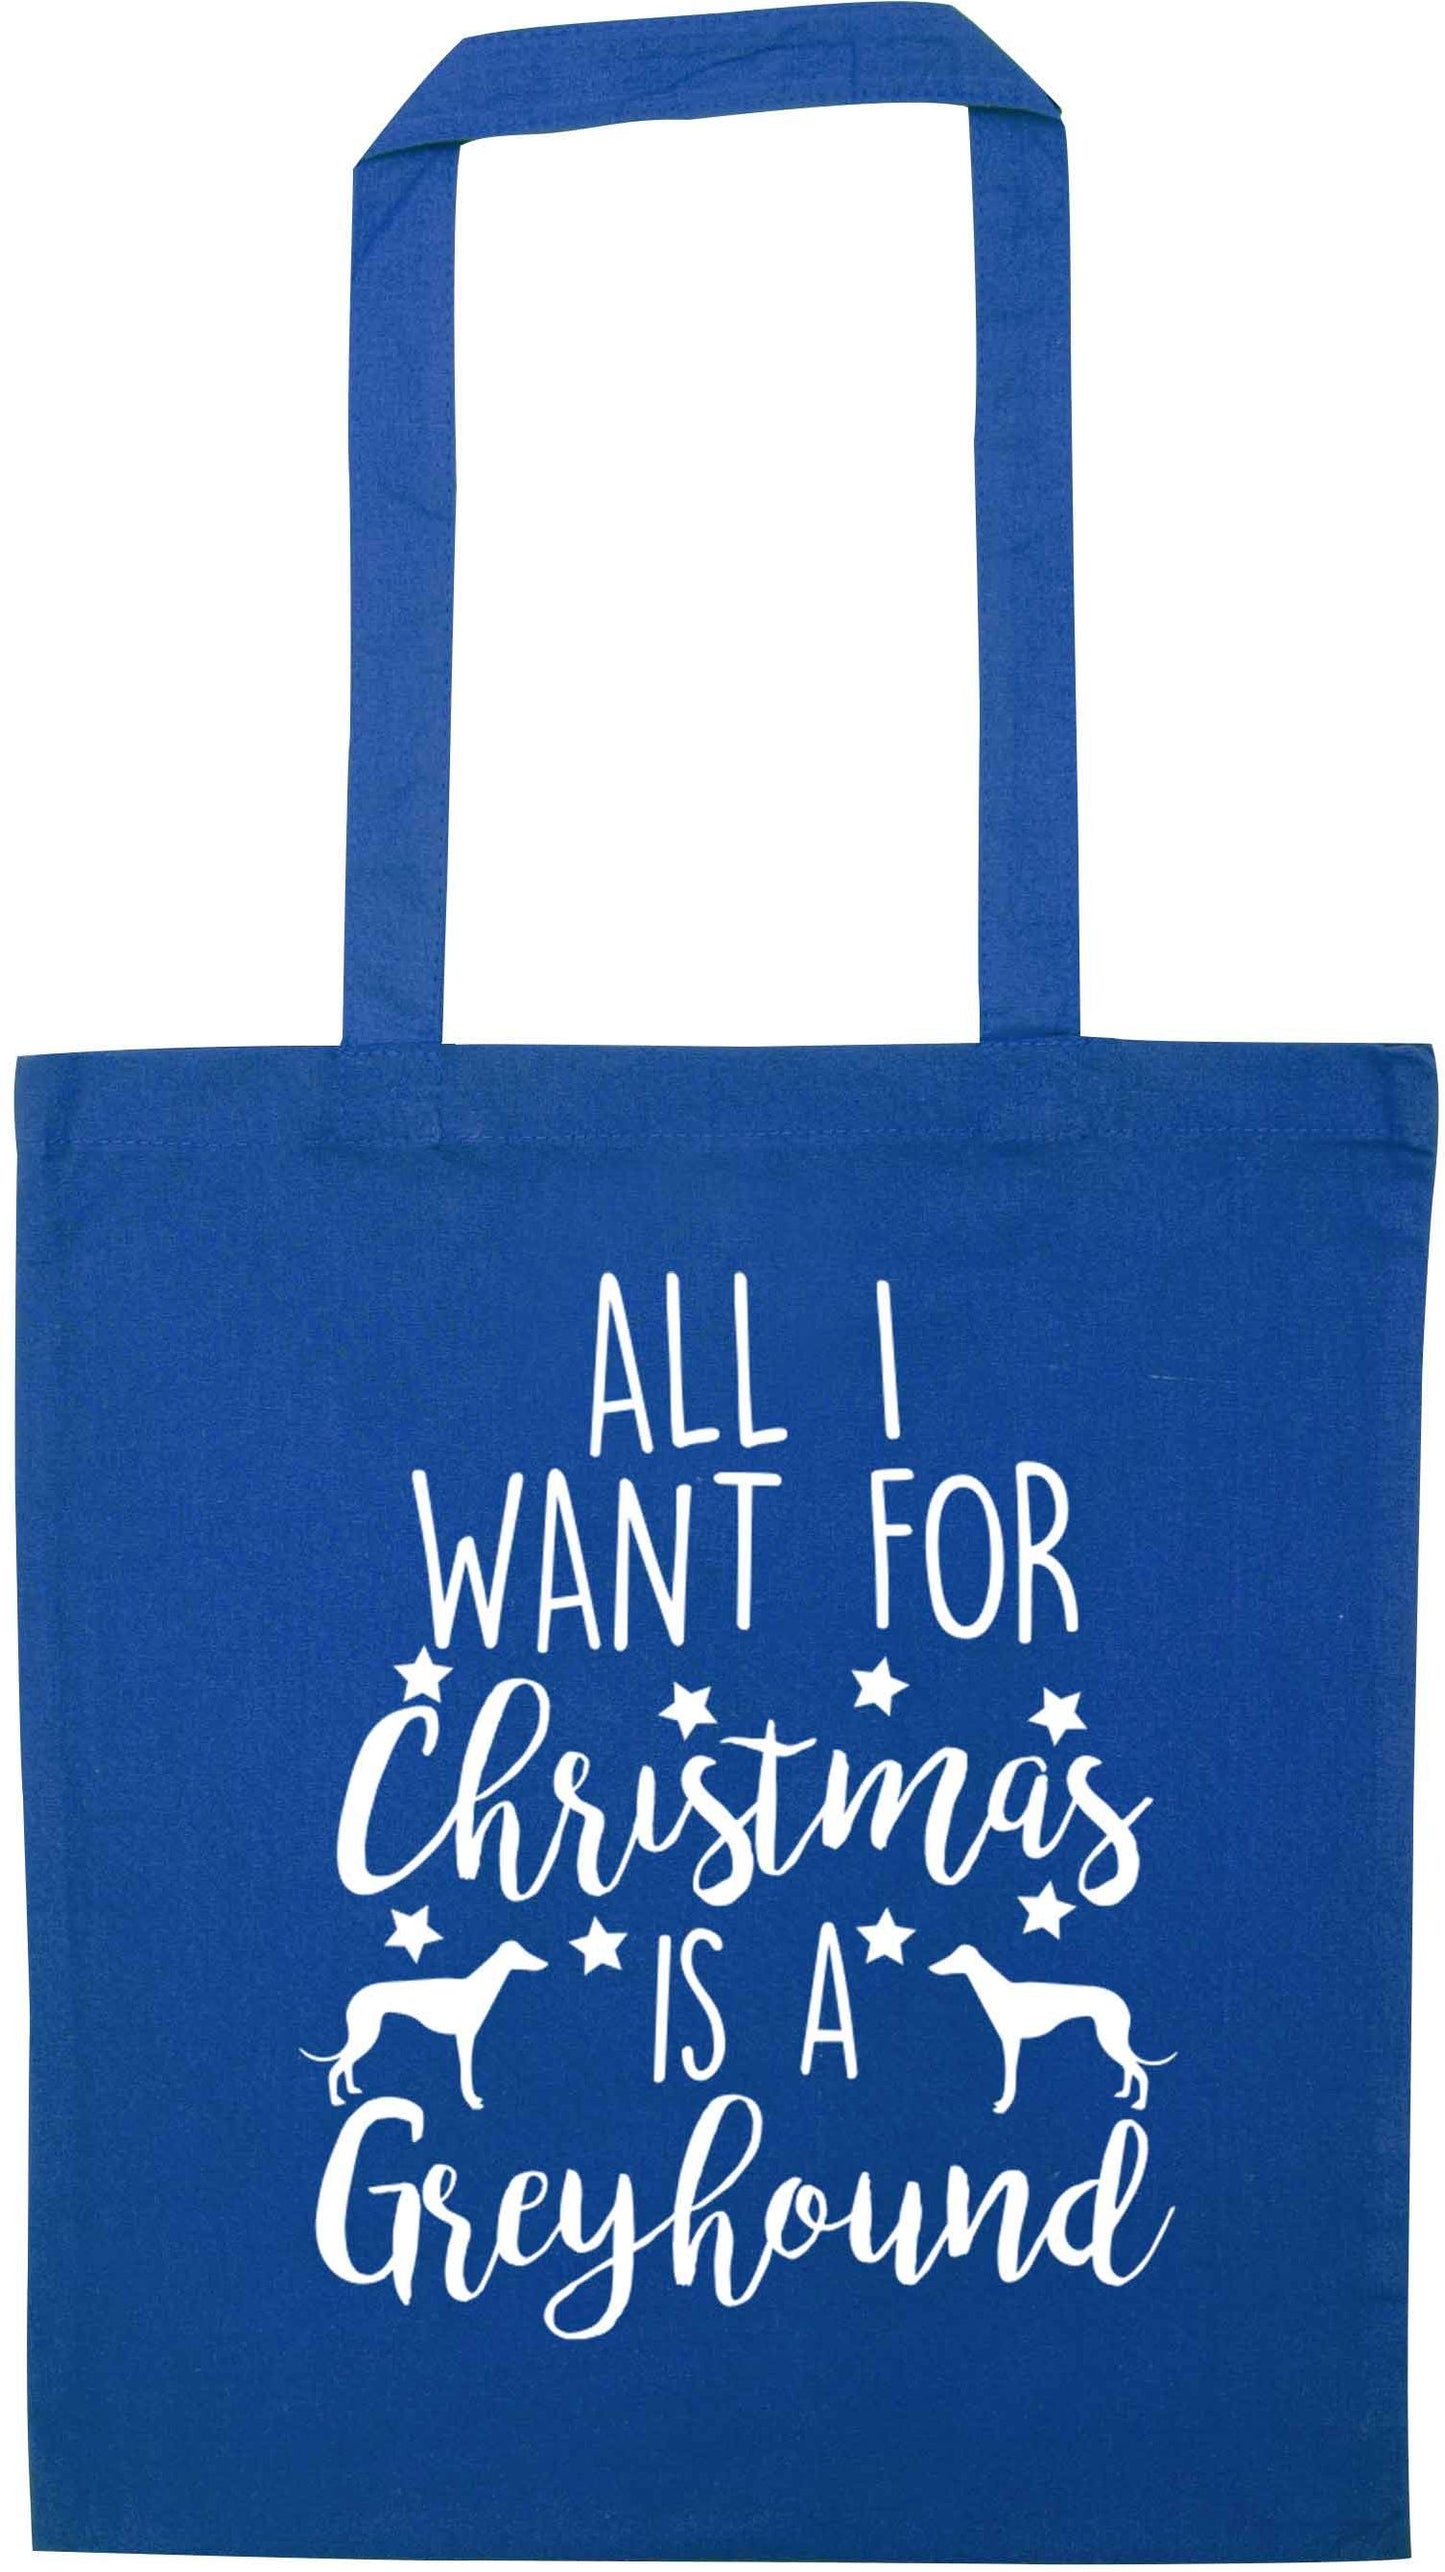 All I want for Christmas is a greyhound blue tote bag